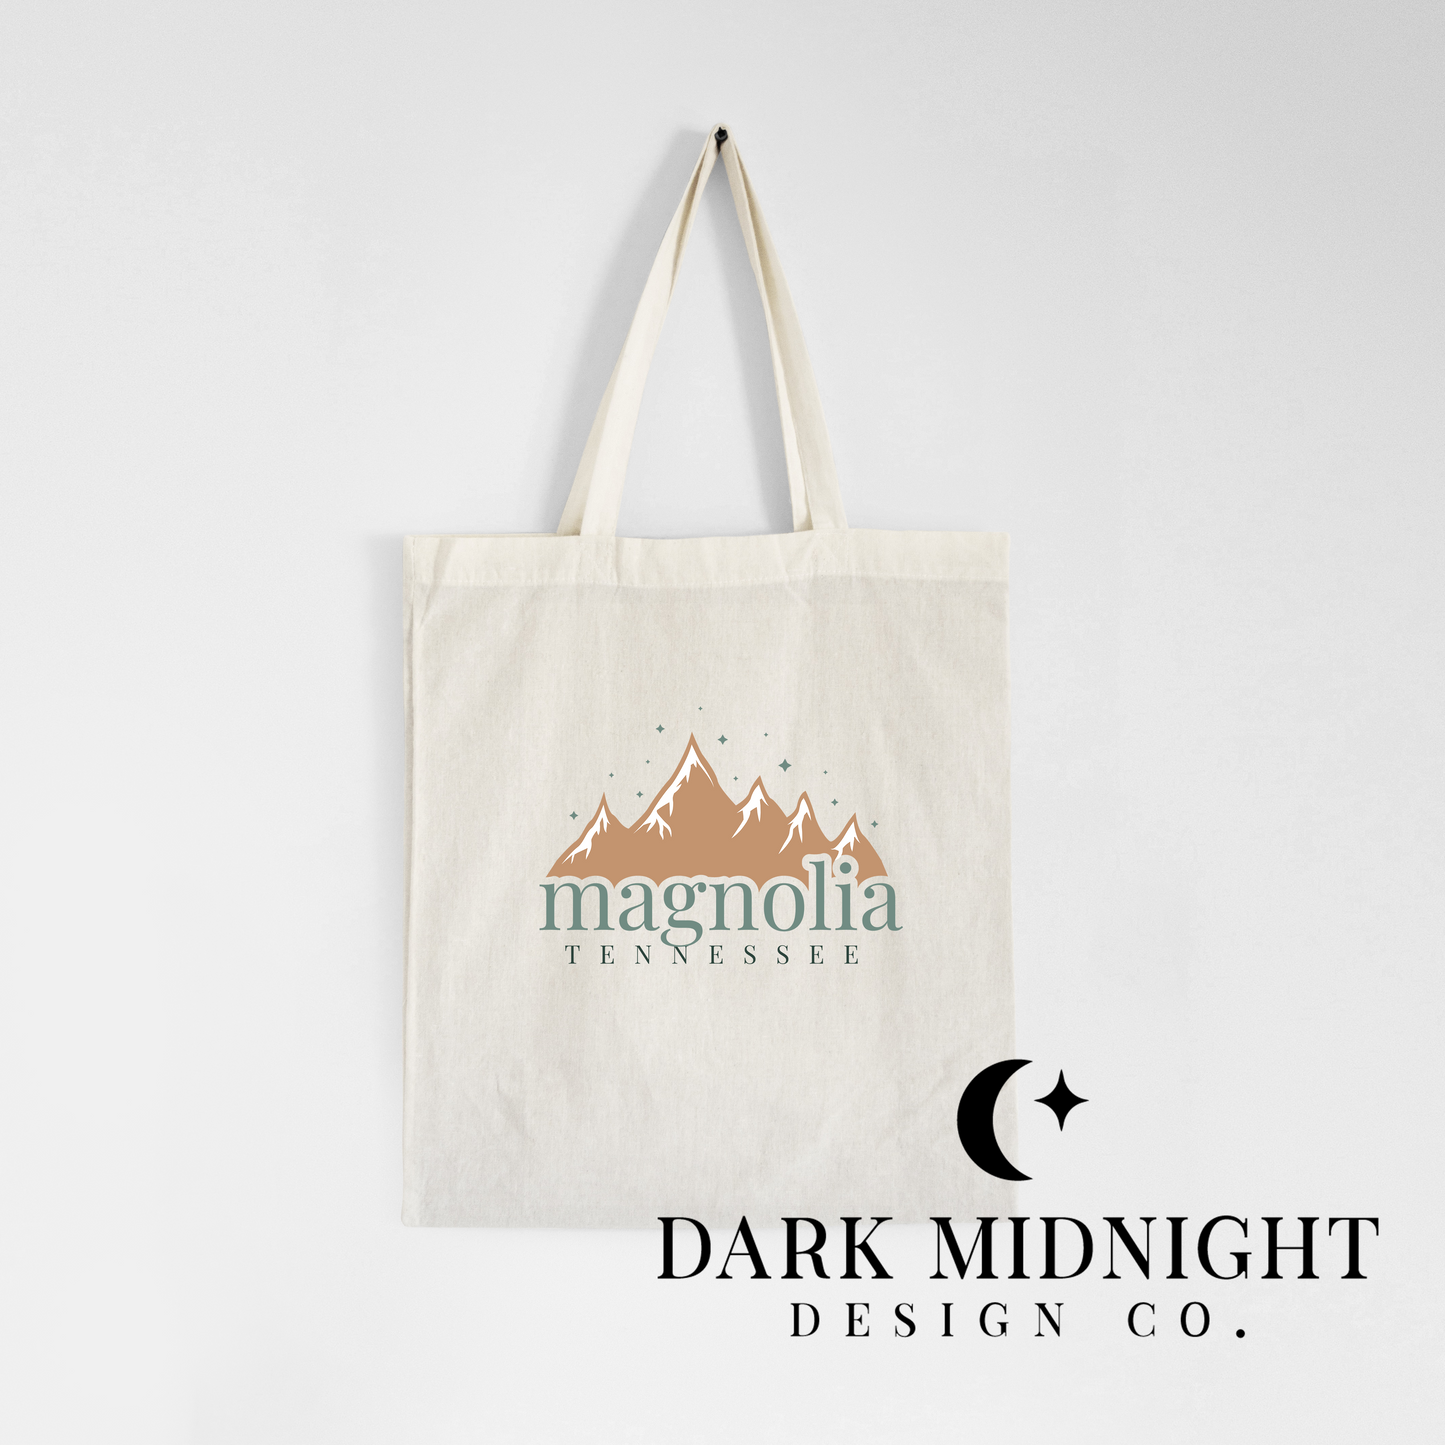 Magnolia Tennessee Tote Bag - Officially Licensed AJ Alexander Merch